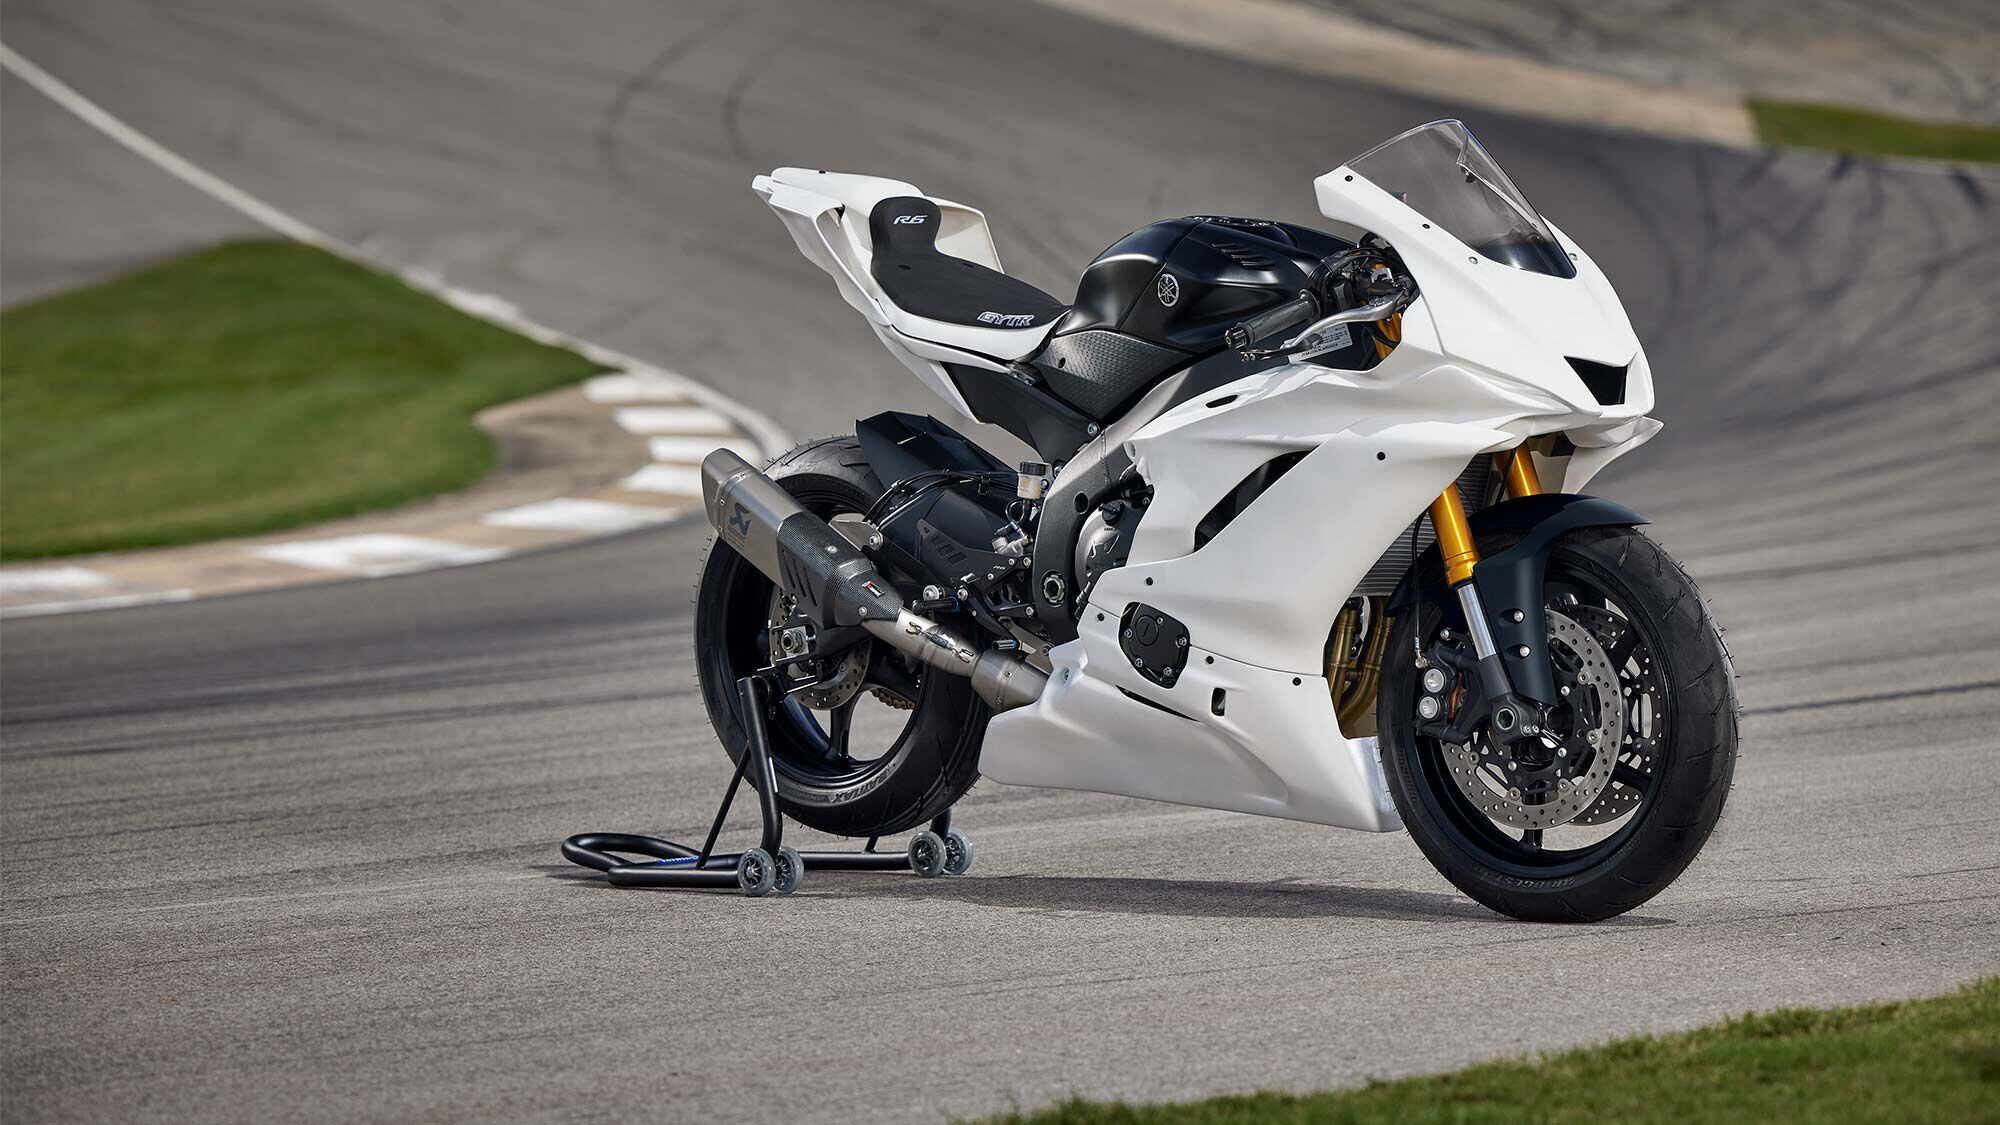 The GYTR-kitted YZF-R6 comes outfitted with a variety of go-fast goodies from the GYTR parts catalog.